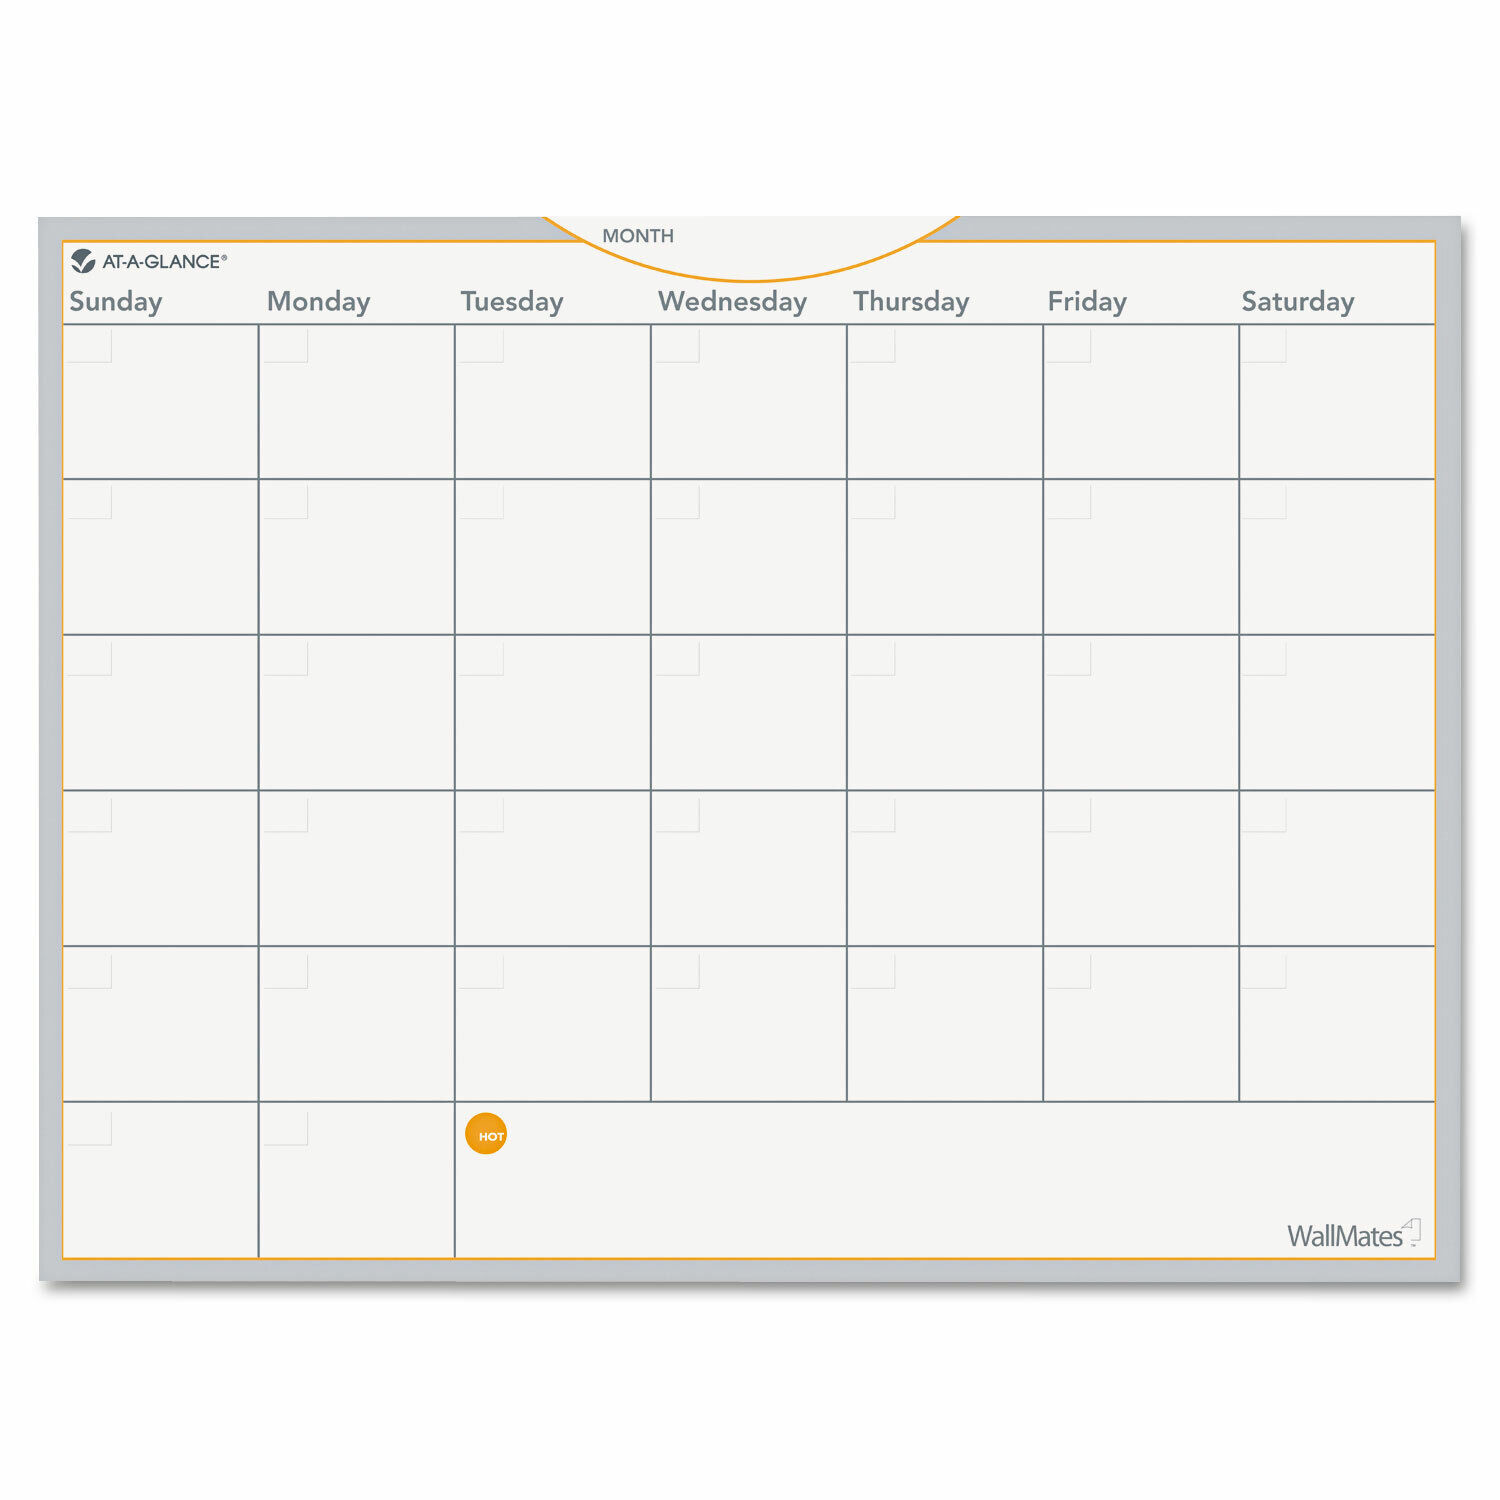 At-A-Glance WallMates Self-Adhesive Dry Erase Monthly Planning Surface 24 x 18 - $54.99